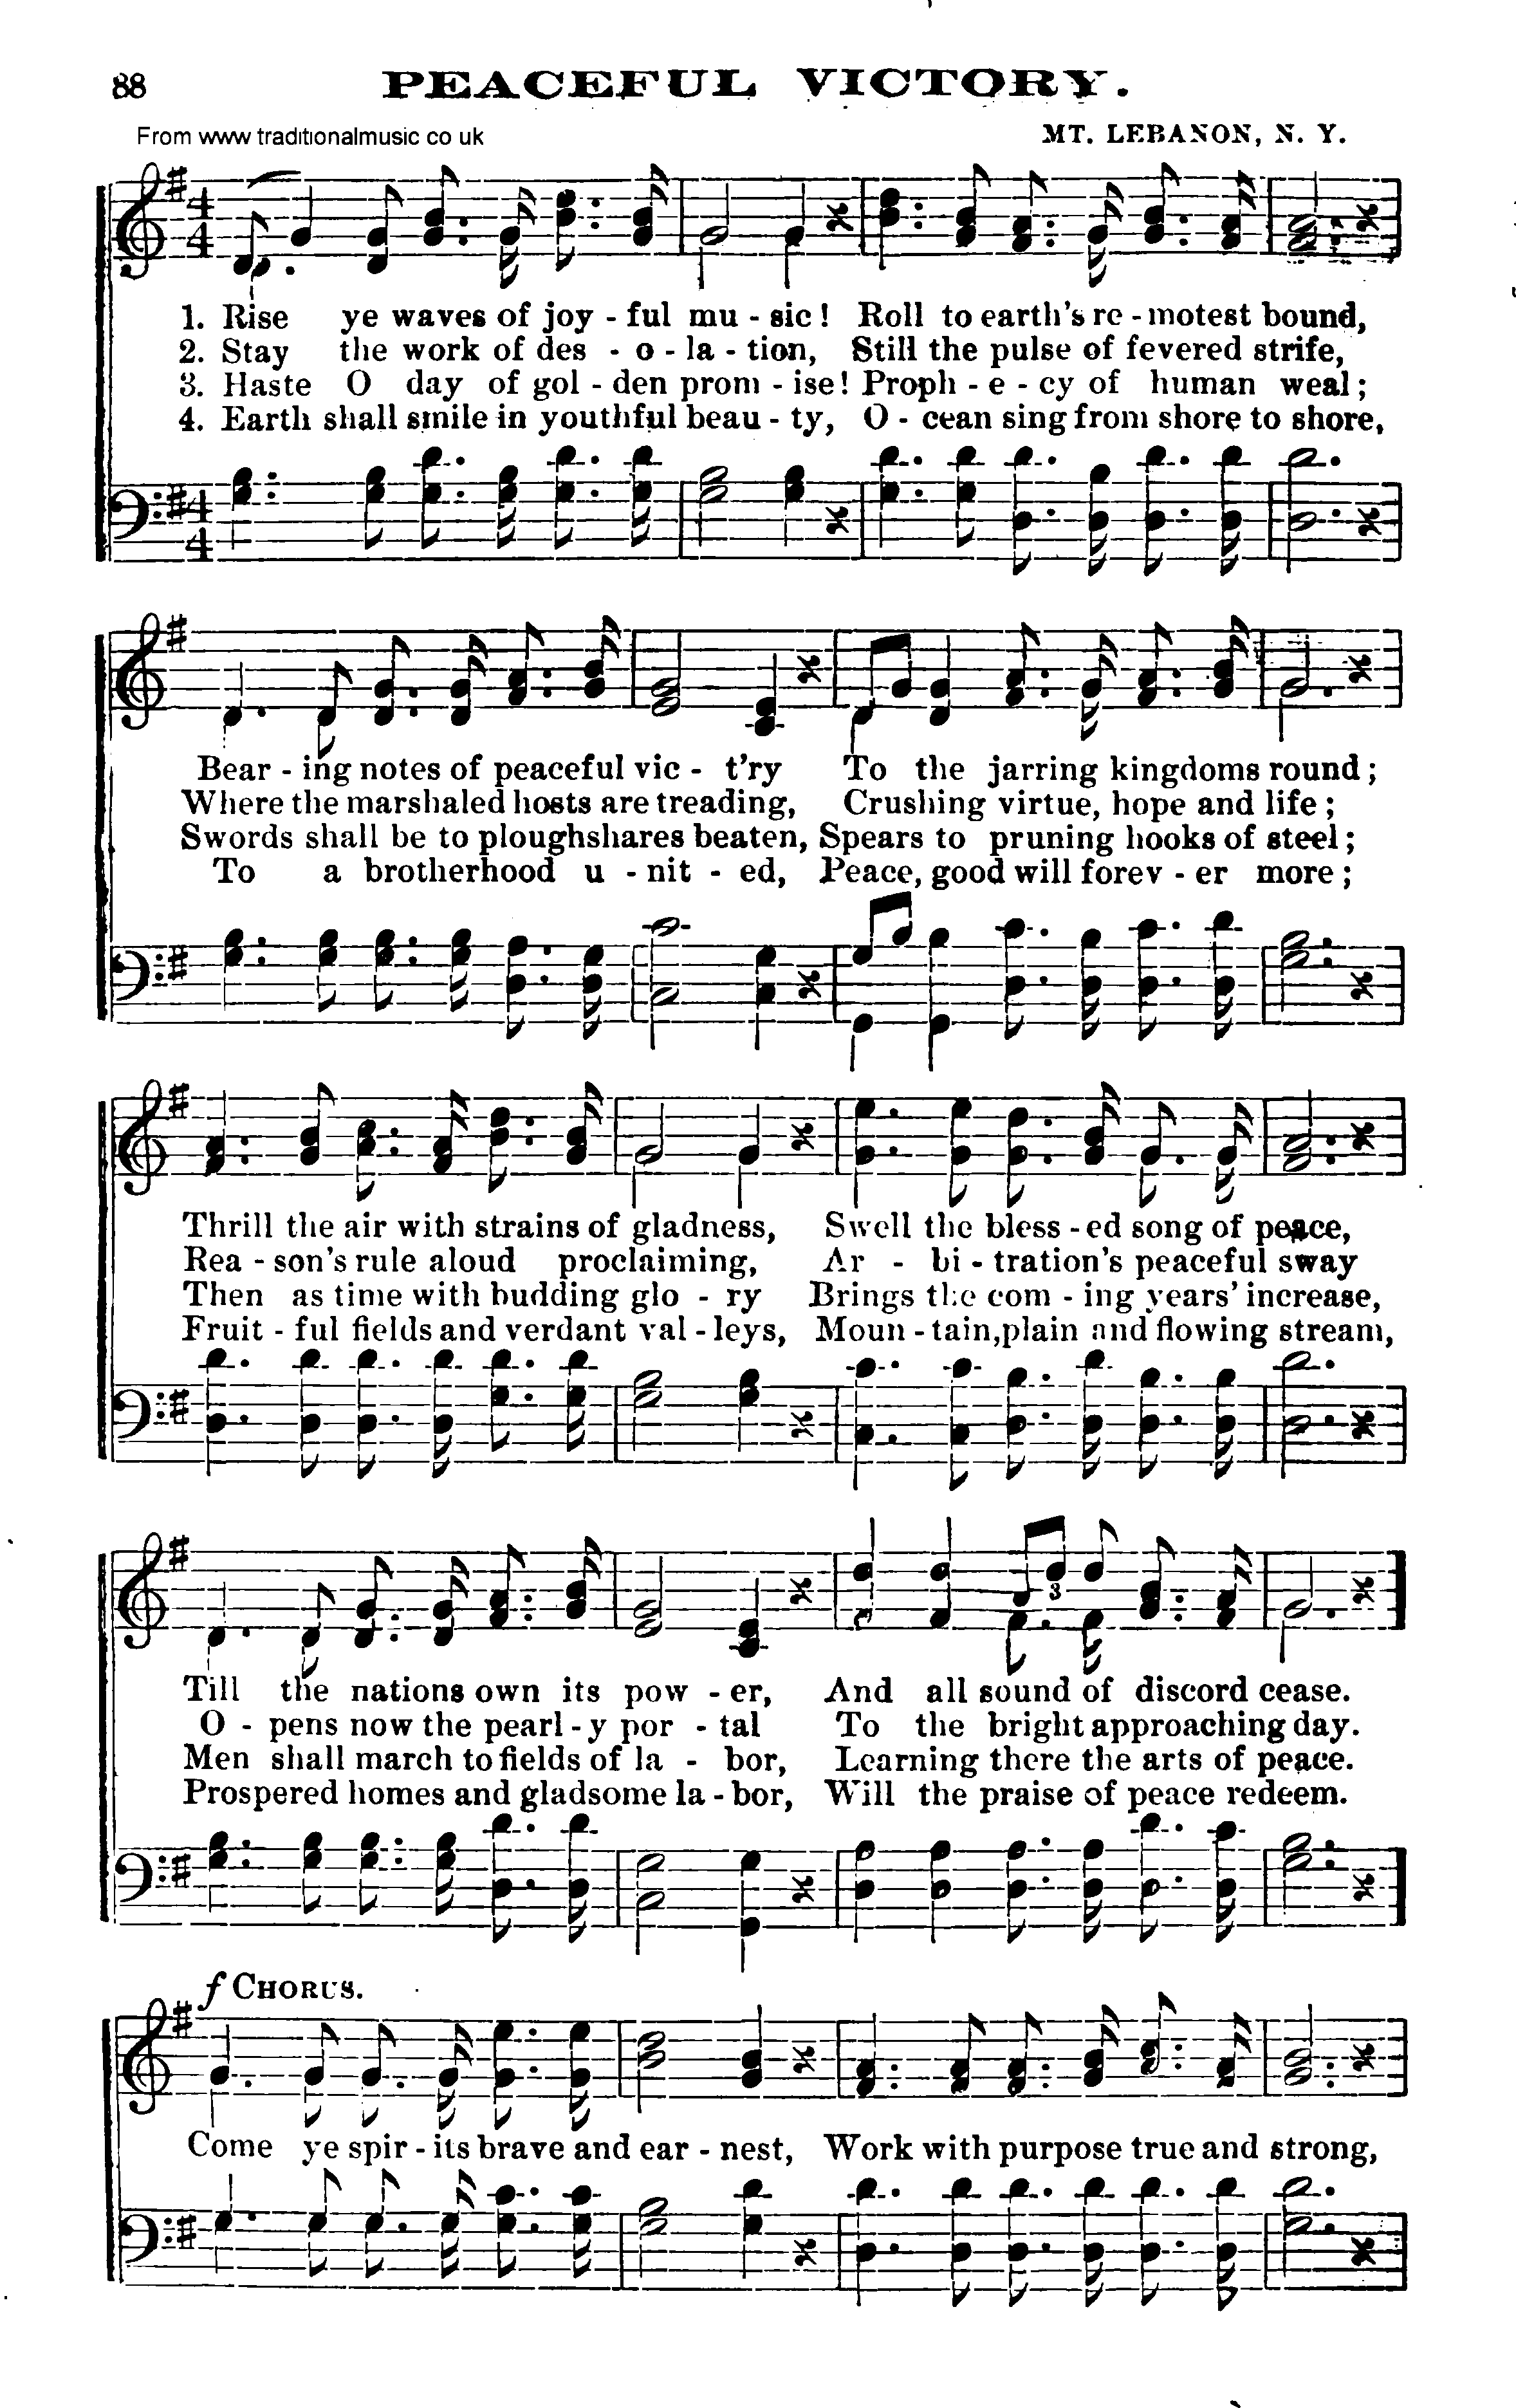 Shaker Music collection, Hymn: Peaceful Victory, sheetmusic and PDF